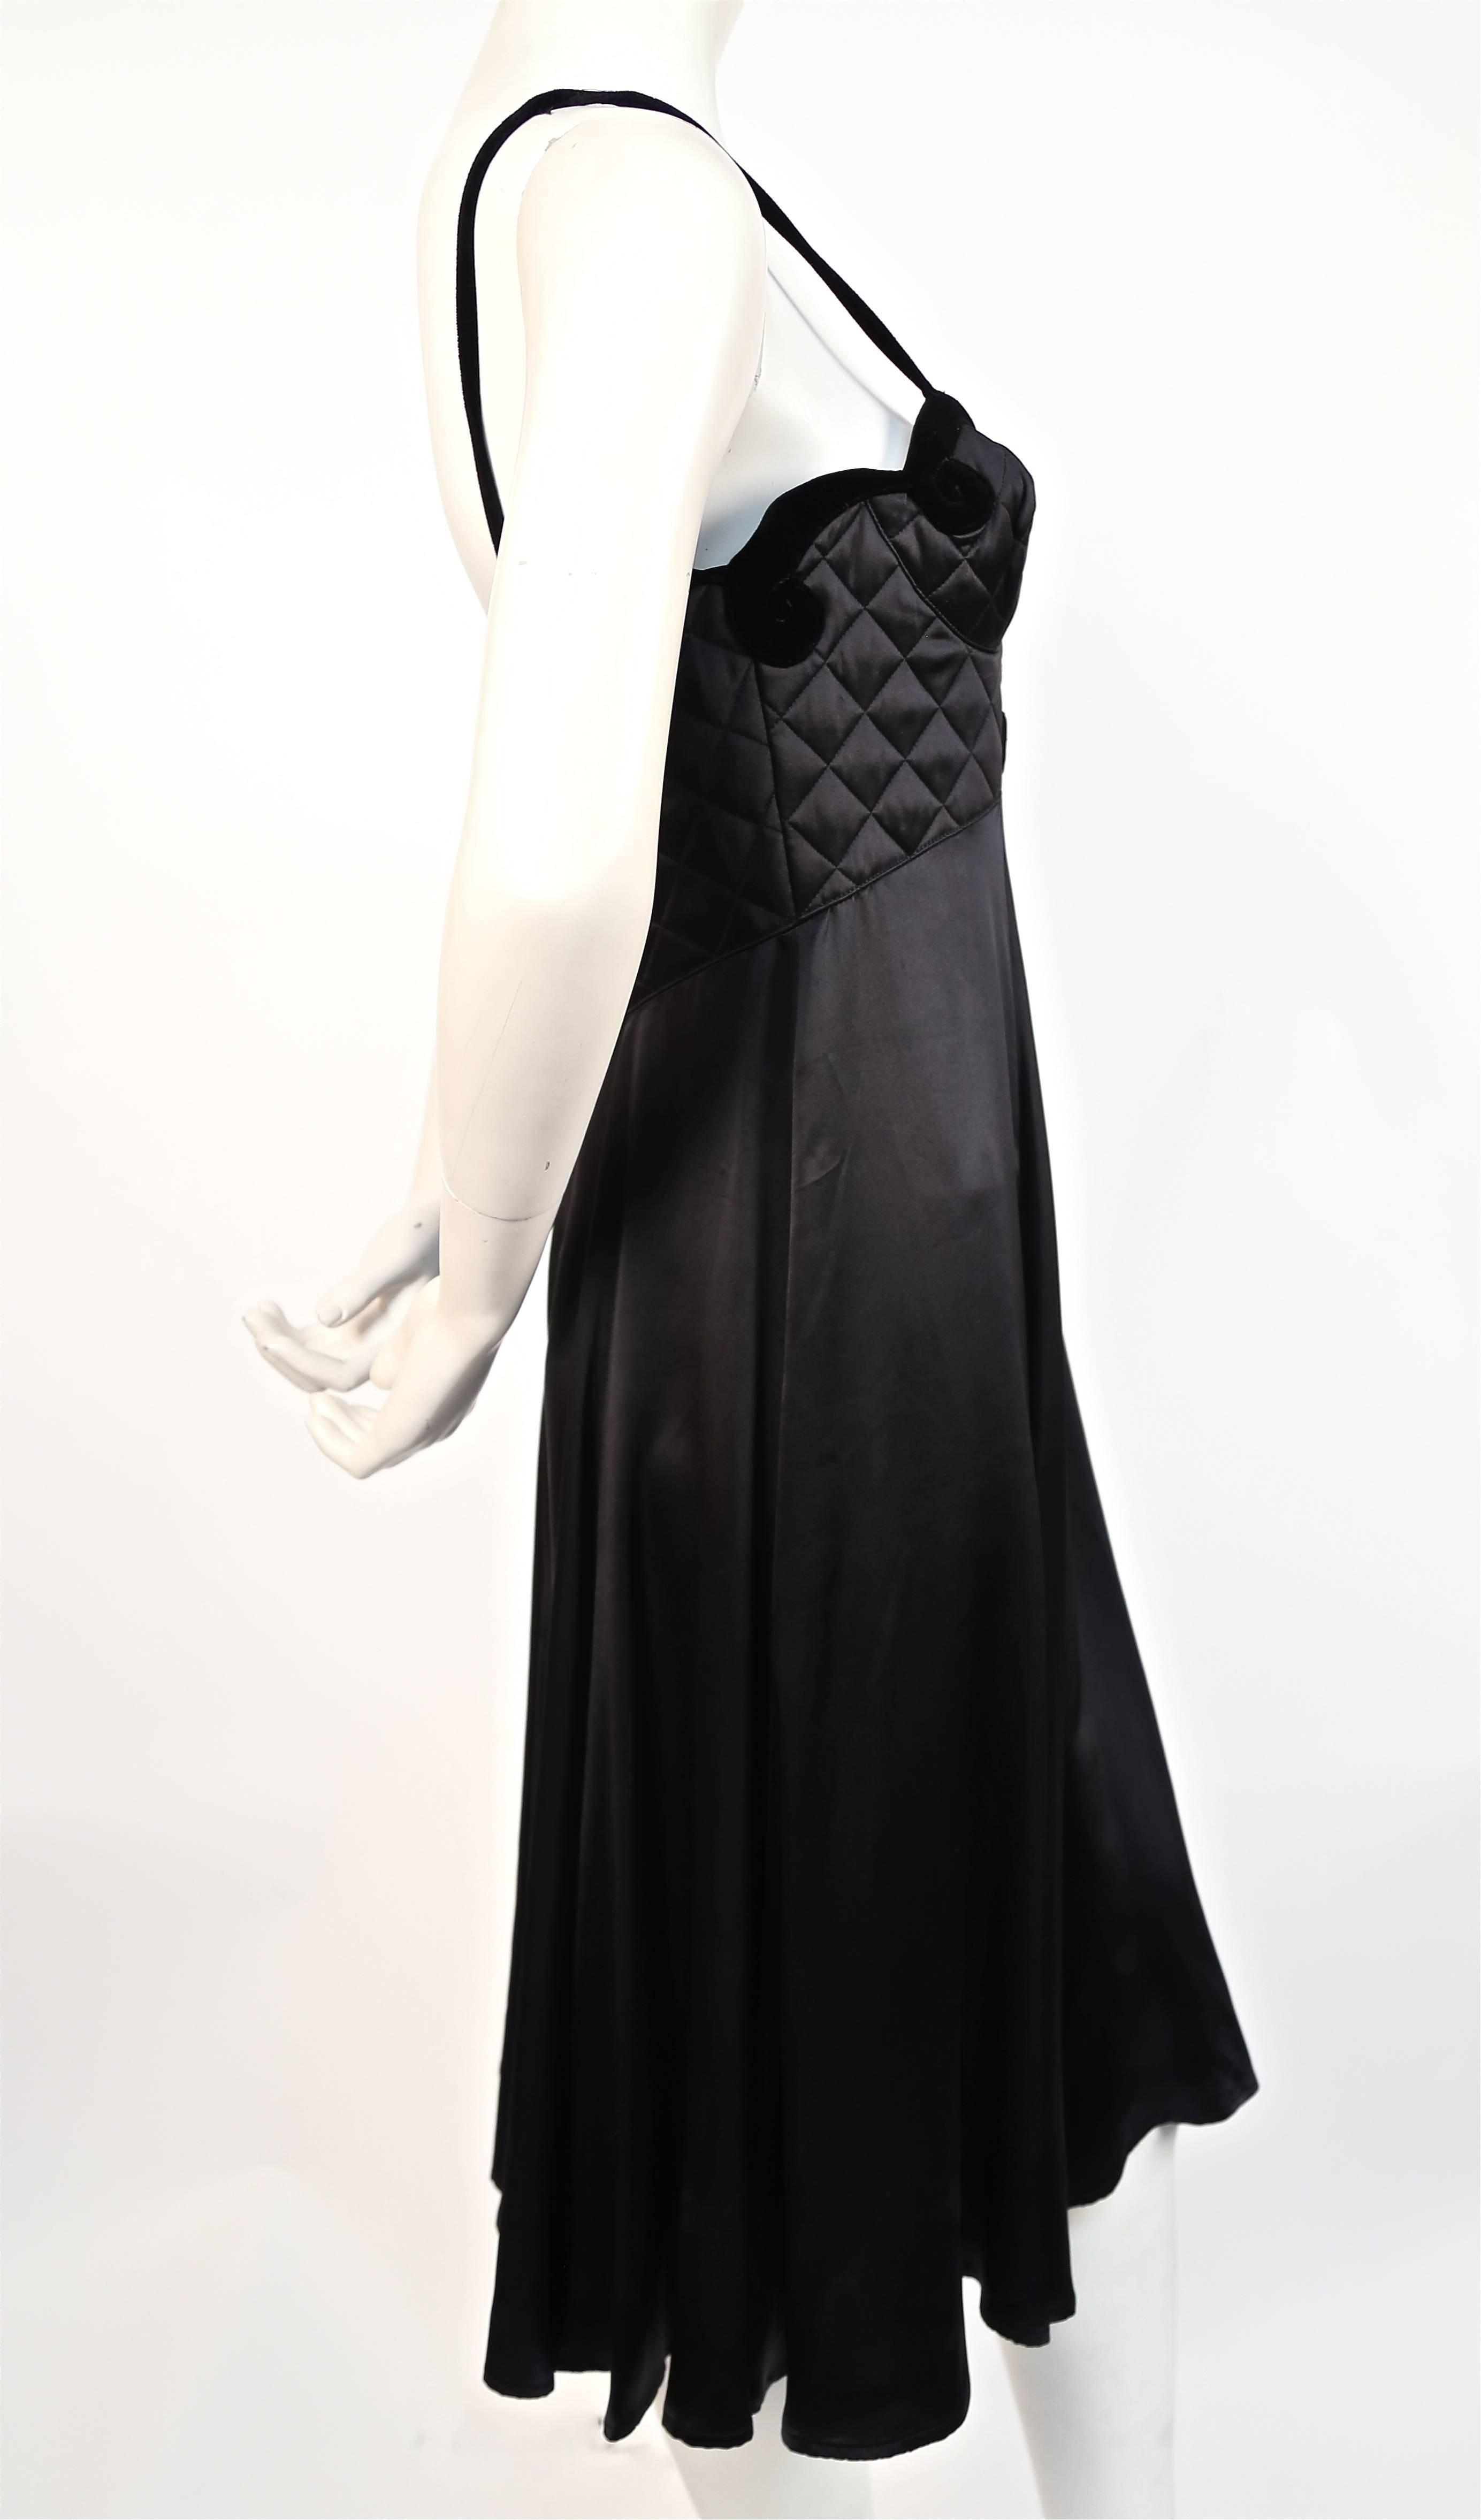 Very rare jet black silk charmeuse gown with quilted vevet bustier by Thierry Mugler dating to circa 1992. Unique cut out at bust.  Best fits a size 6 or slim 8. Approximate measurements *due to internal bustier*: bust 34-35